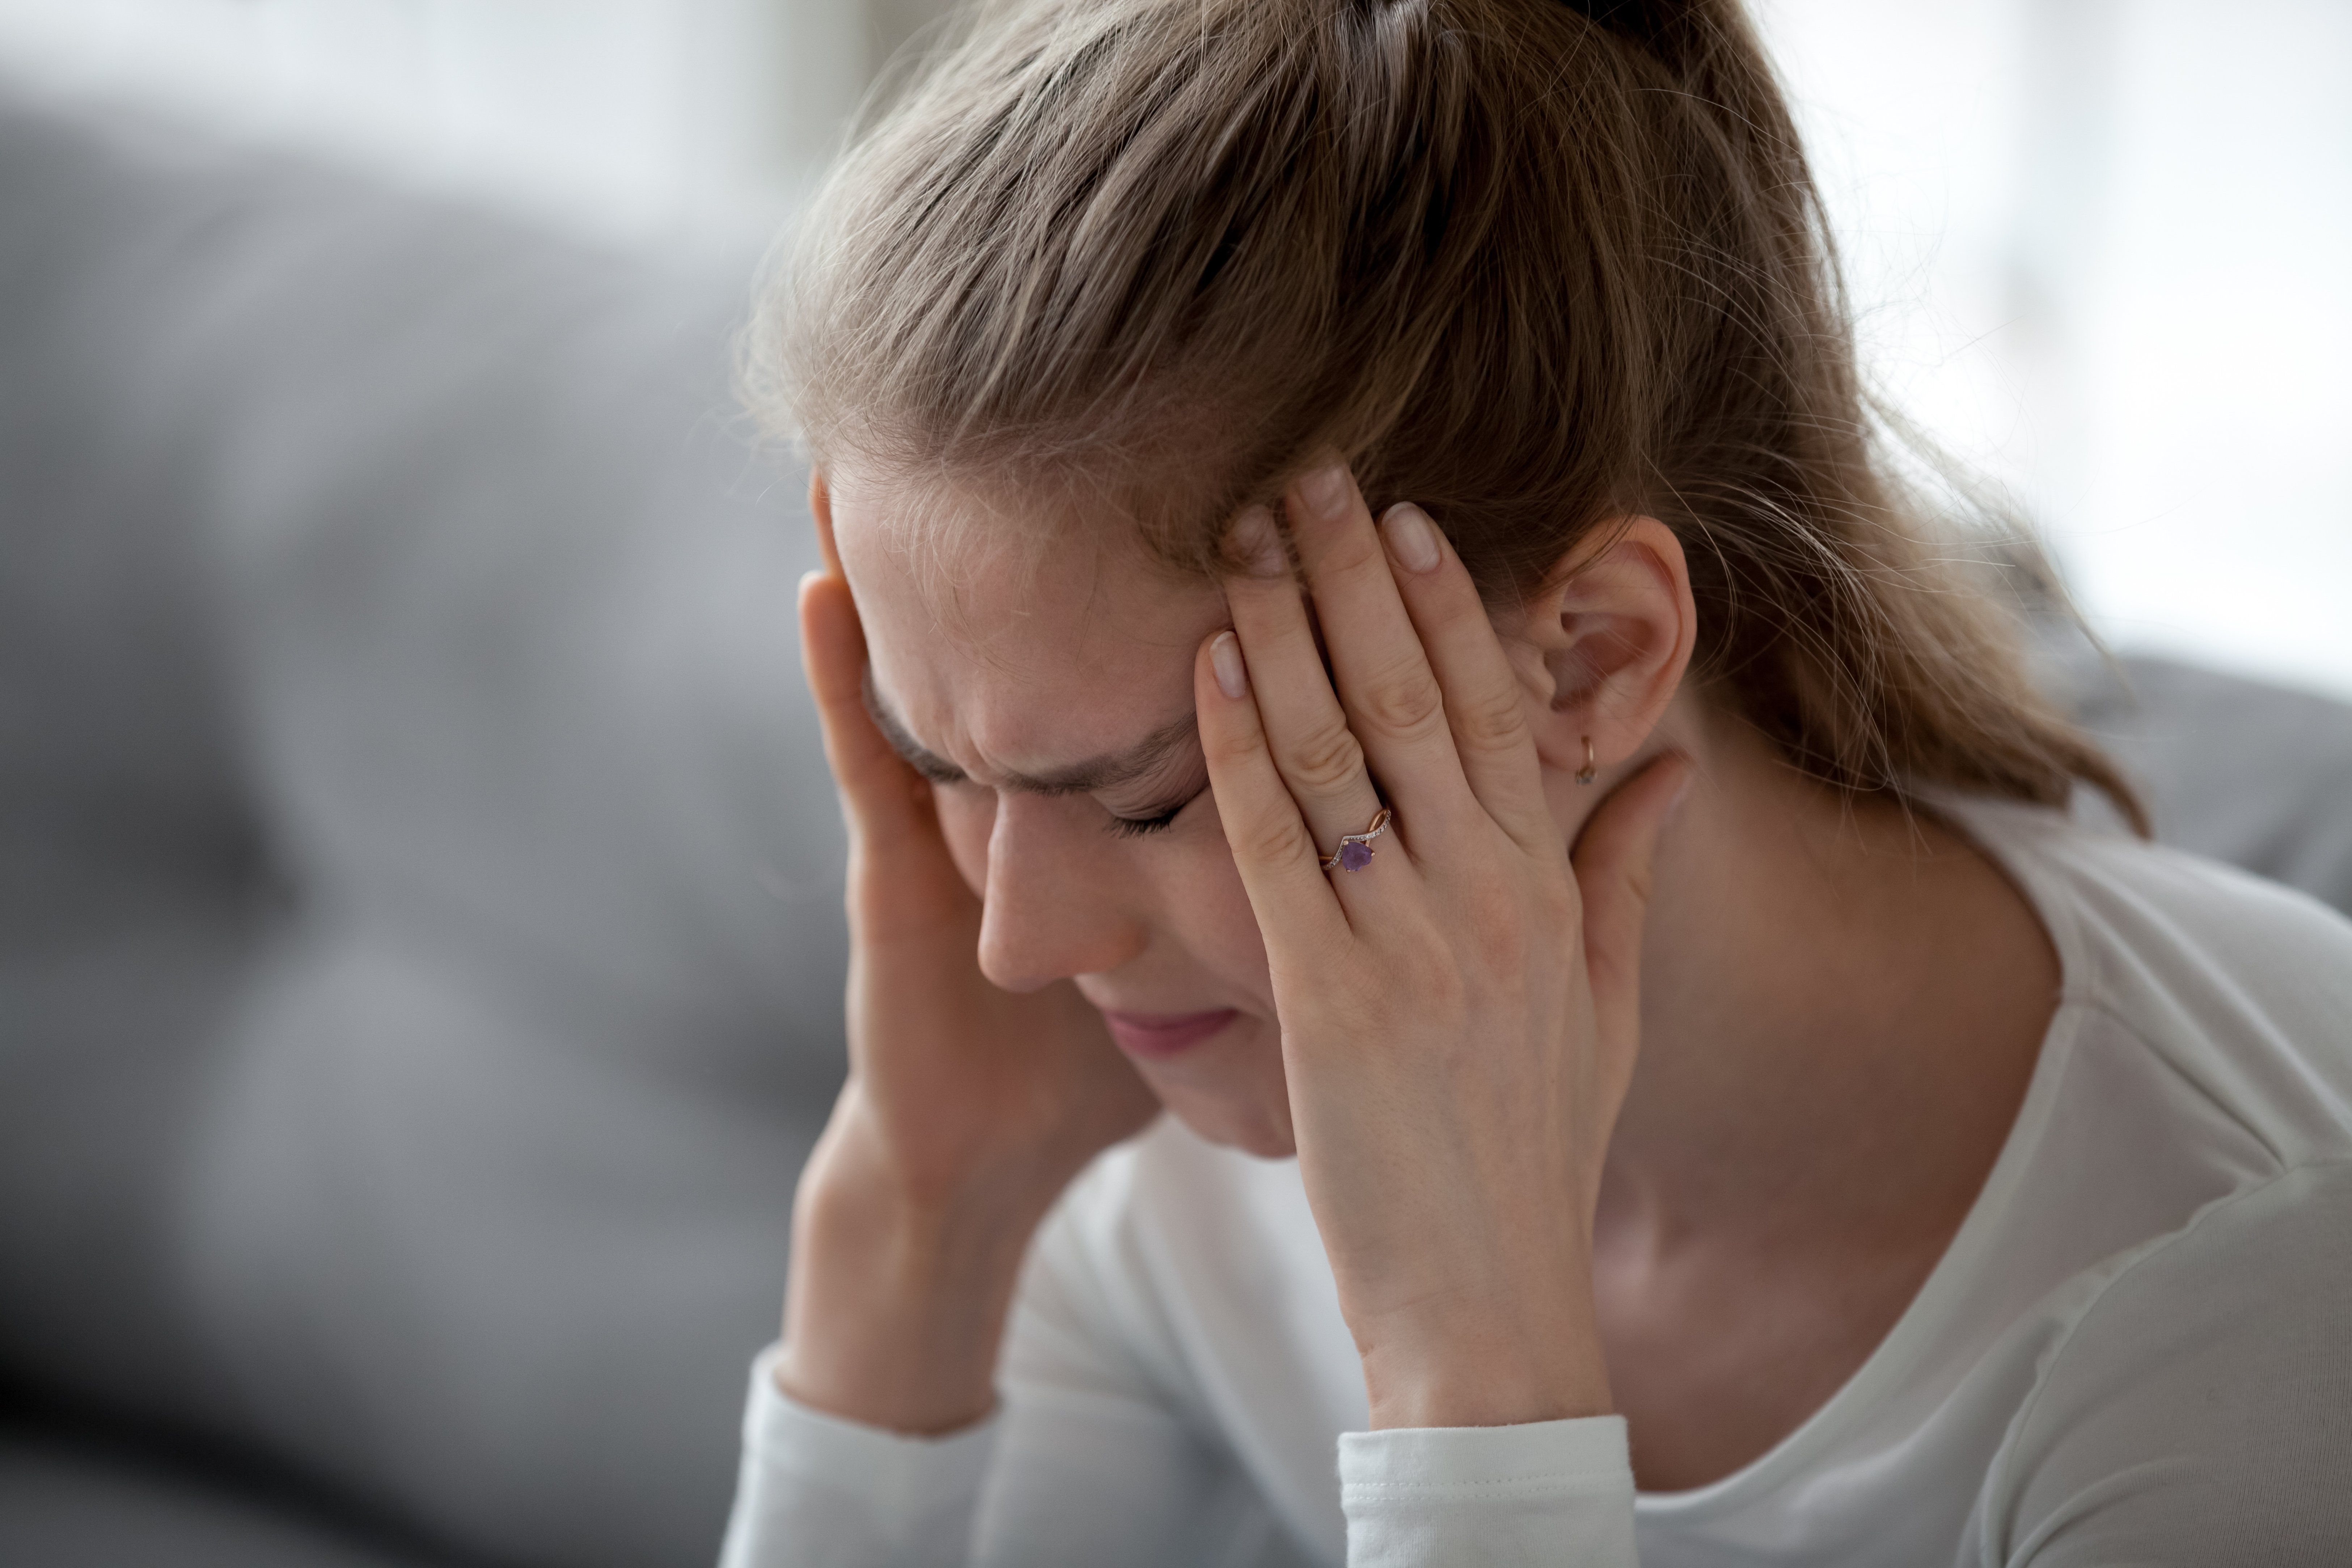 Why Do I Have Persistent Migraines?